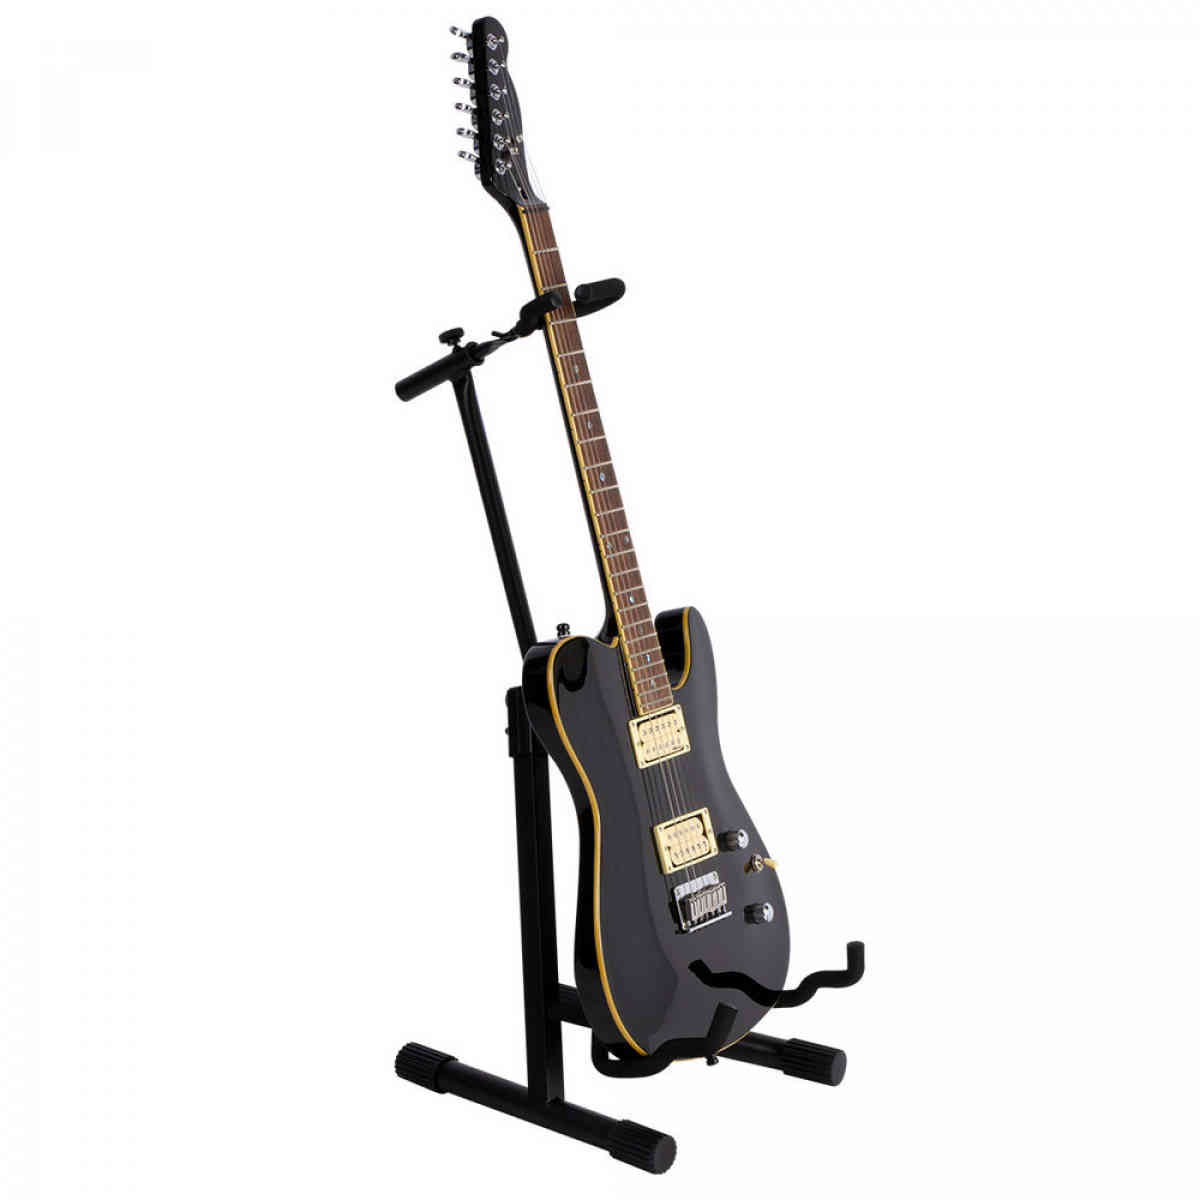 On-Stage GS7465 Professional Flip-It® A-Frame Guitar Stand